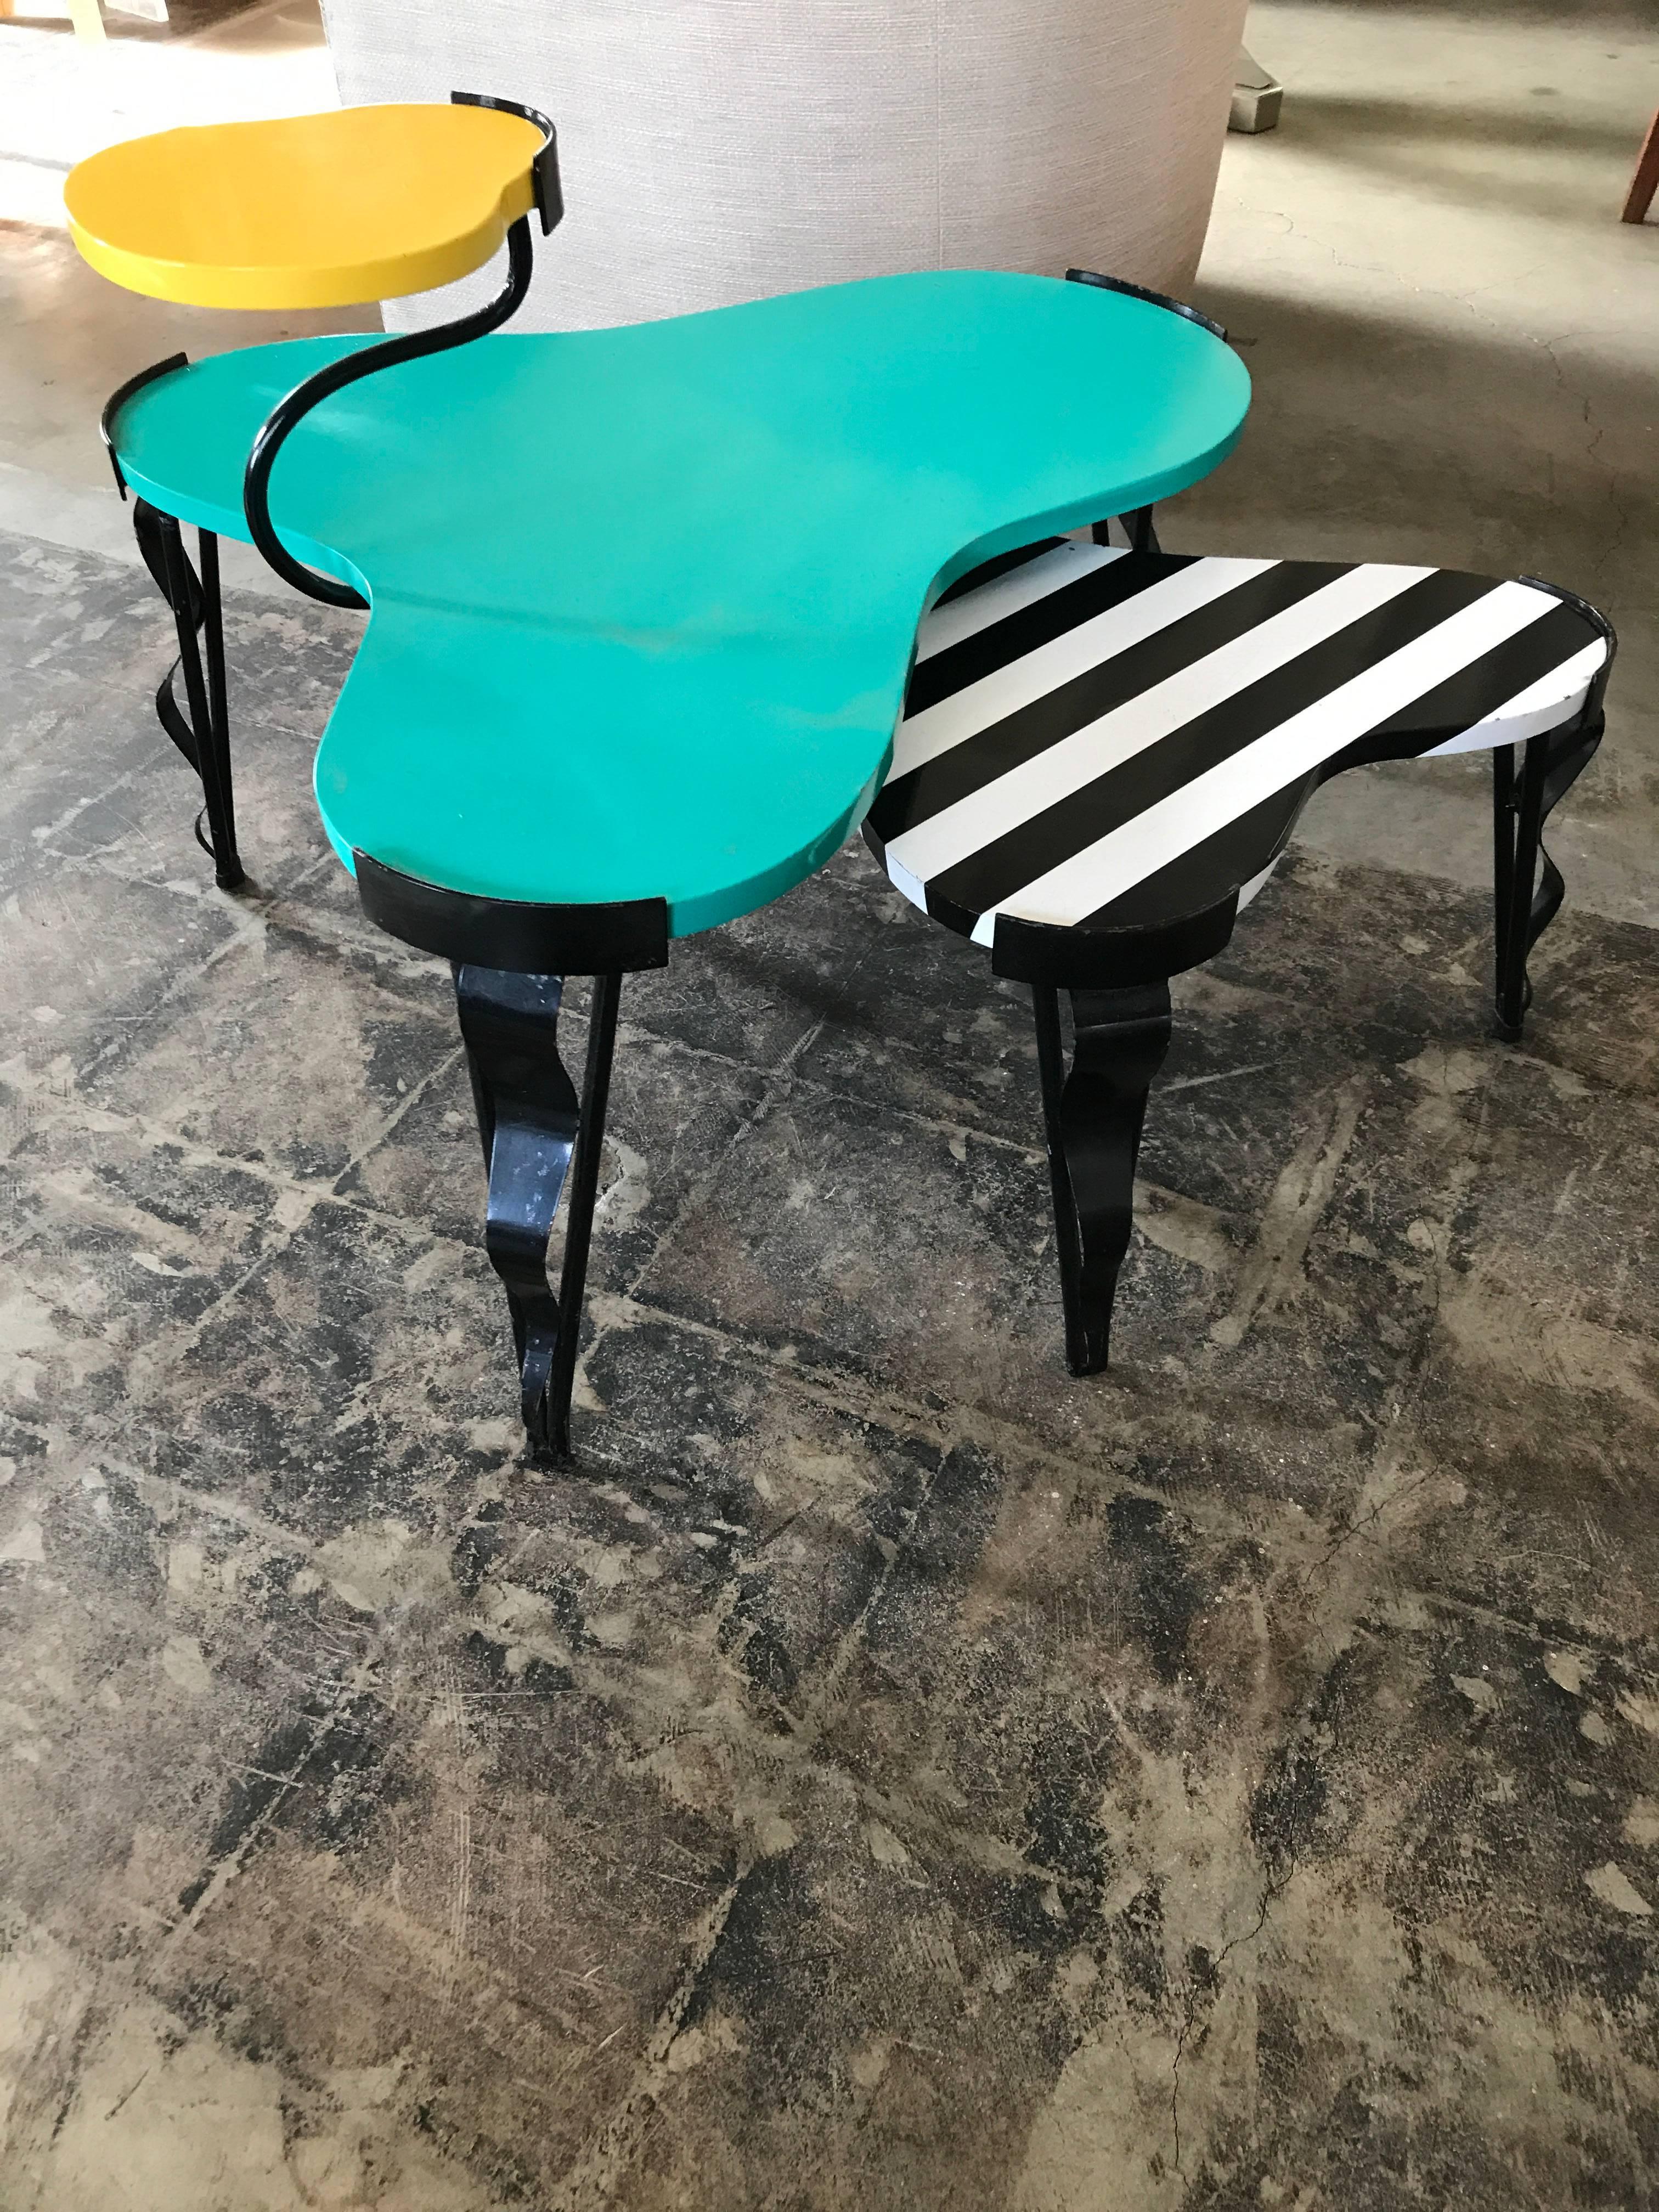 These Memphis inspired side tables are attributed to Los Angeles based designer Harry Siegel and built with a welded steel frame and a shaped, lacquered surface. The two-tiered top piece is finished in lemon yellow and teal lacquer with playful leg